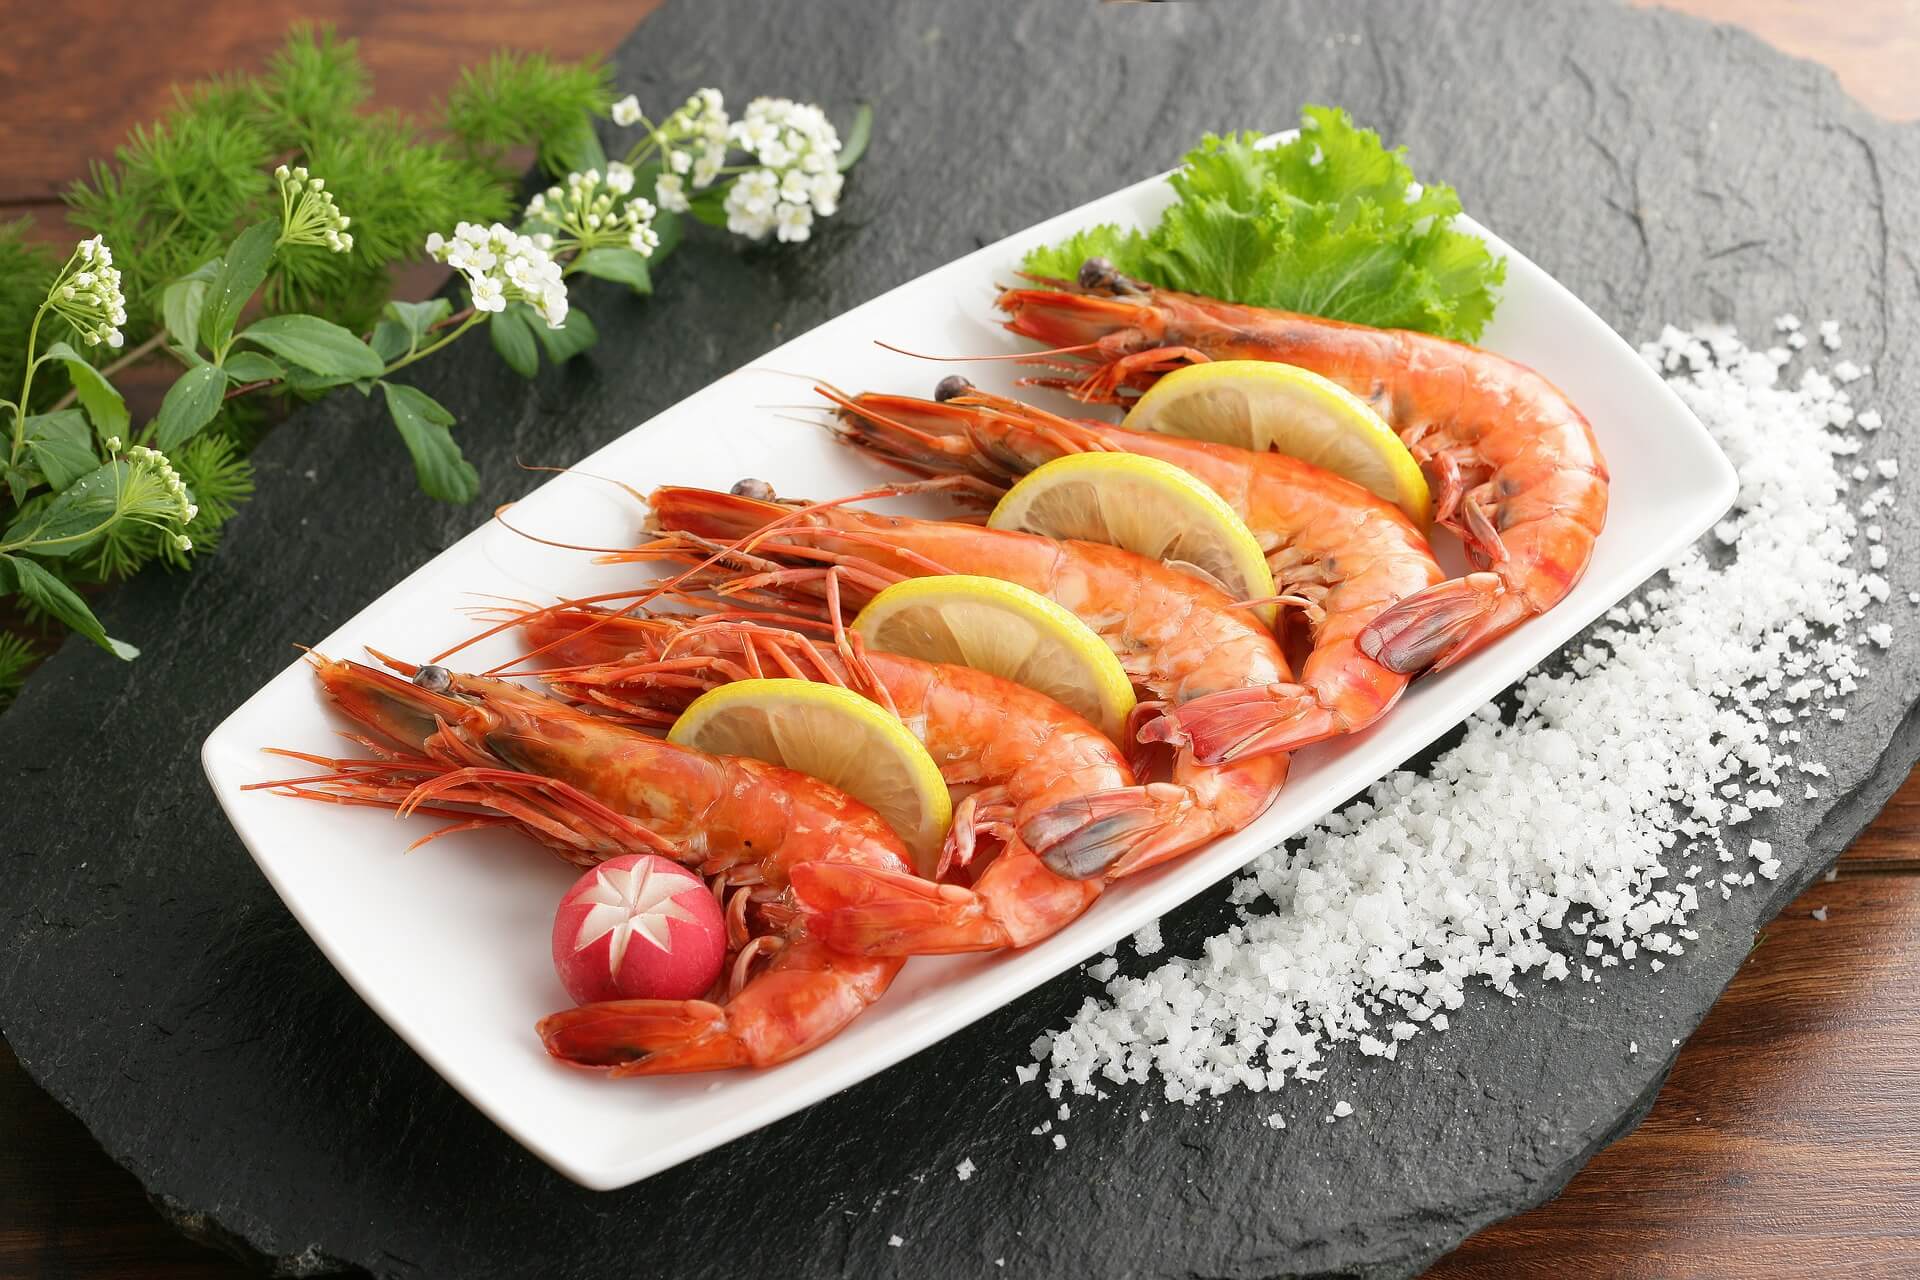 A plate of shrimp with lemon and herbs on it.